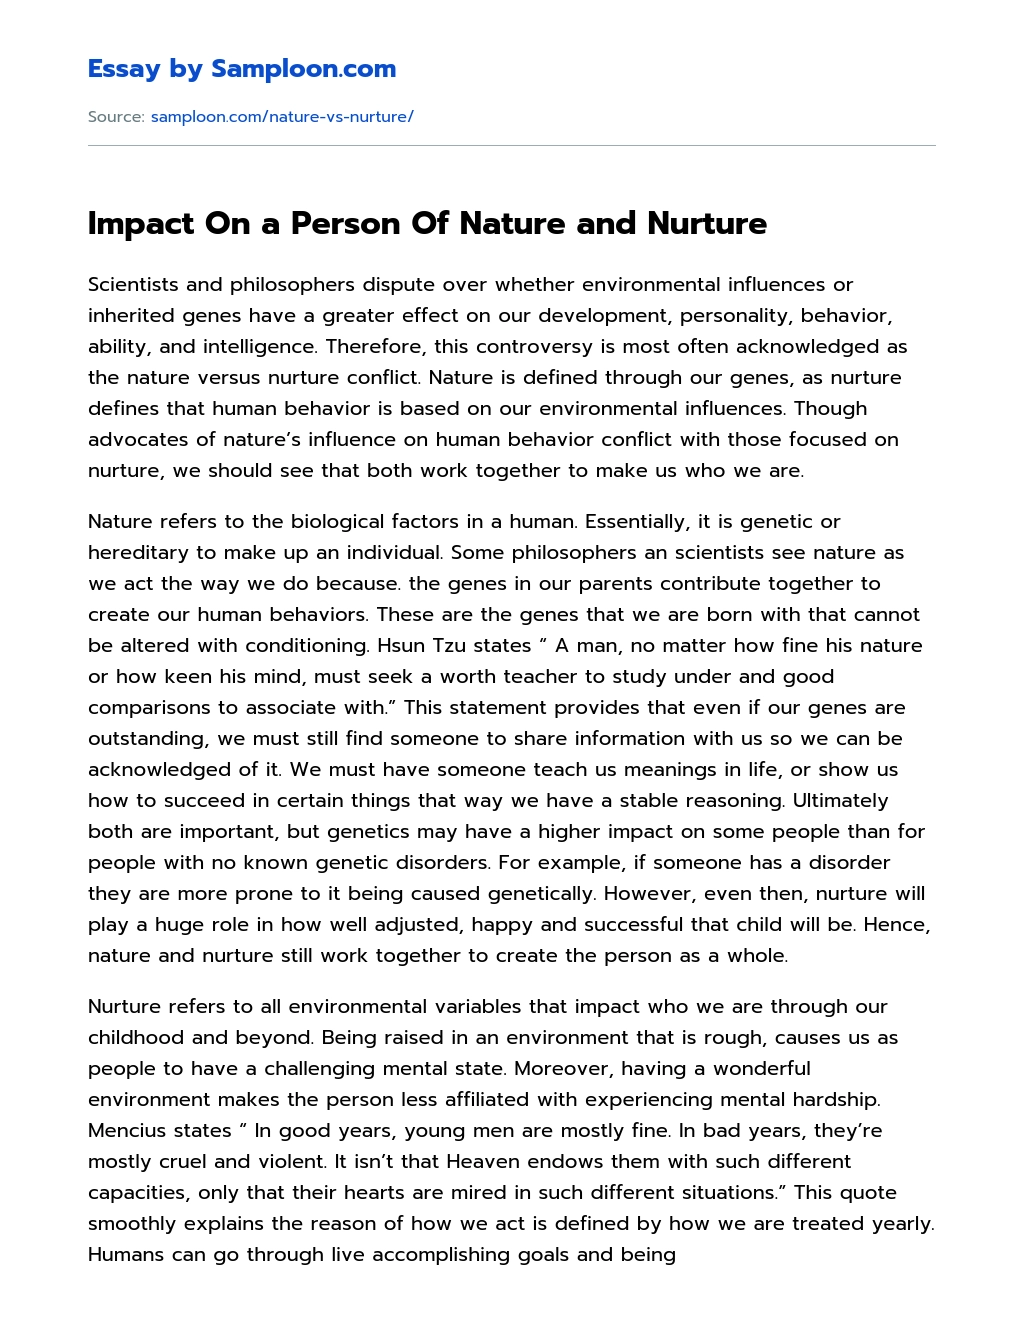 Impact On a Person Of Nature and Nurture essay